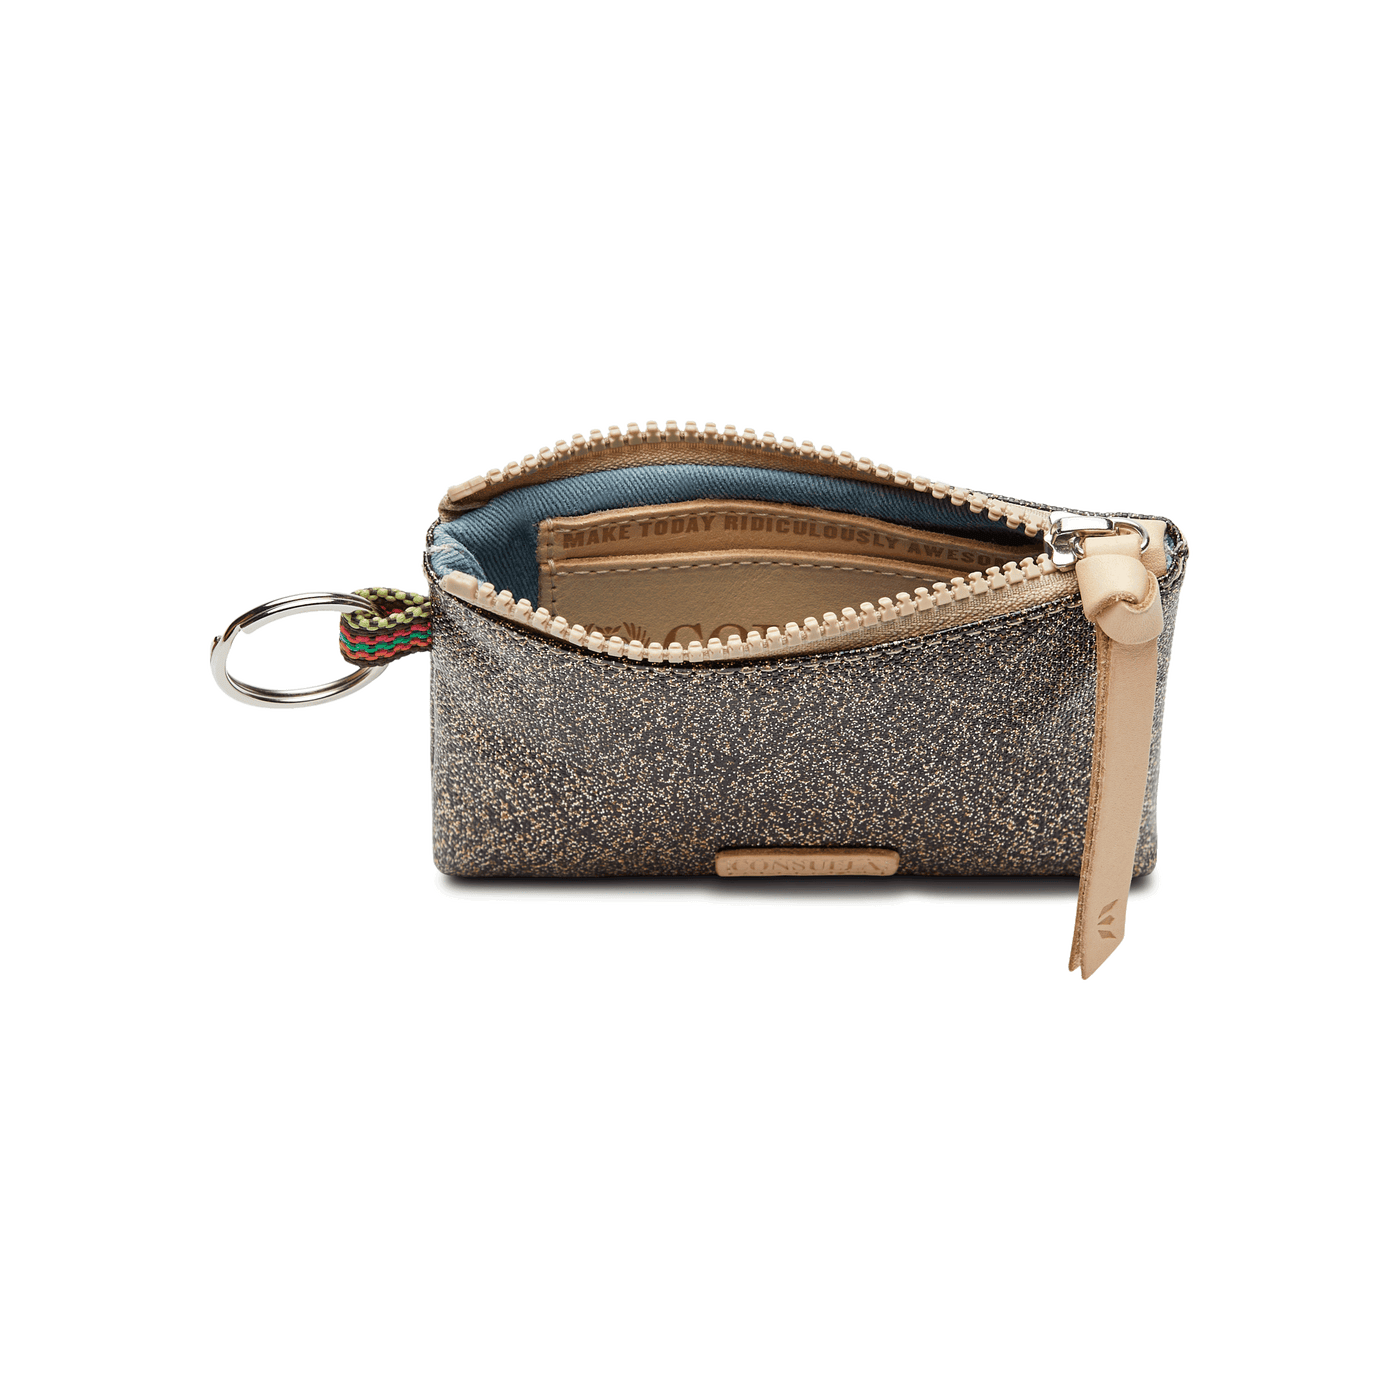 Consuela Pouch - Glitter-110 Handbags-Consuela-Market Street Nest, Fashionable Clothing, Shoes and Home Décor Located in Mabank, TX